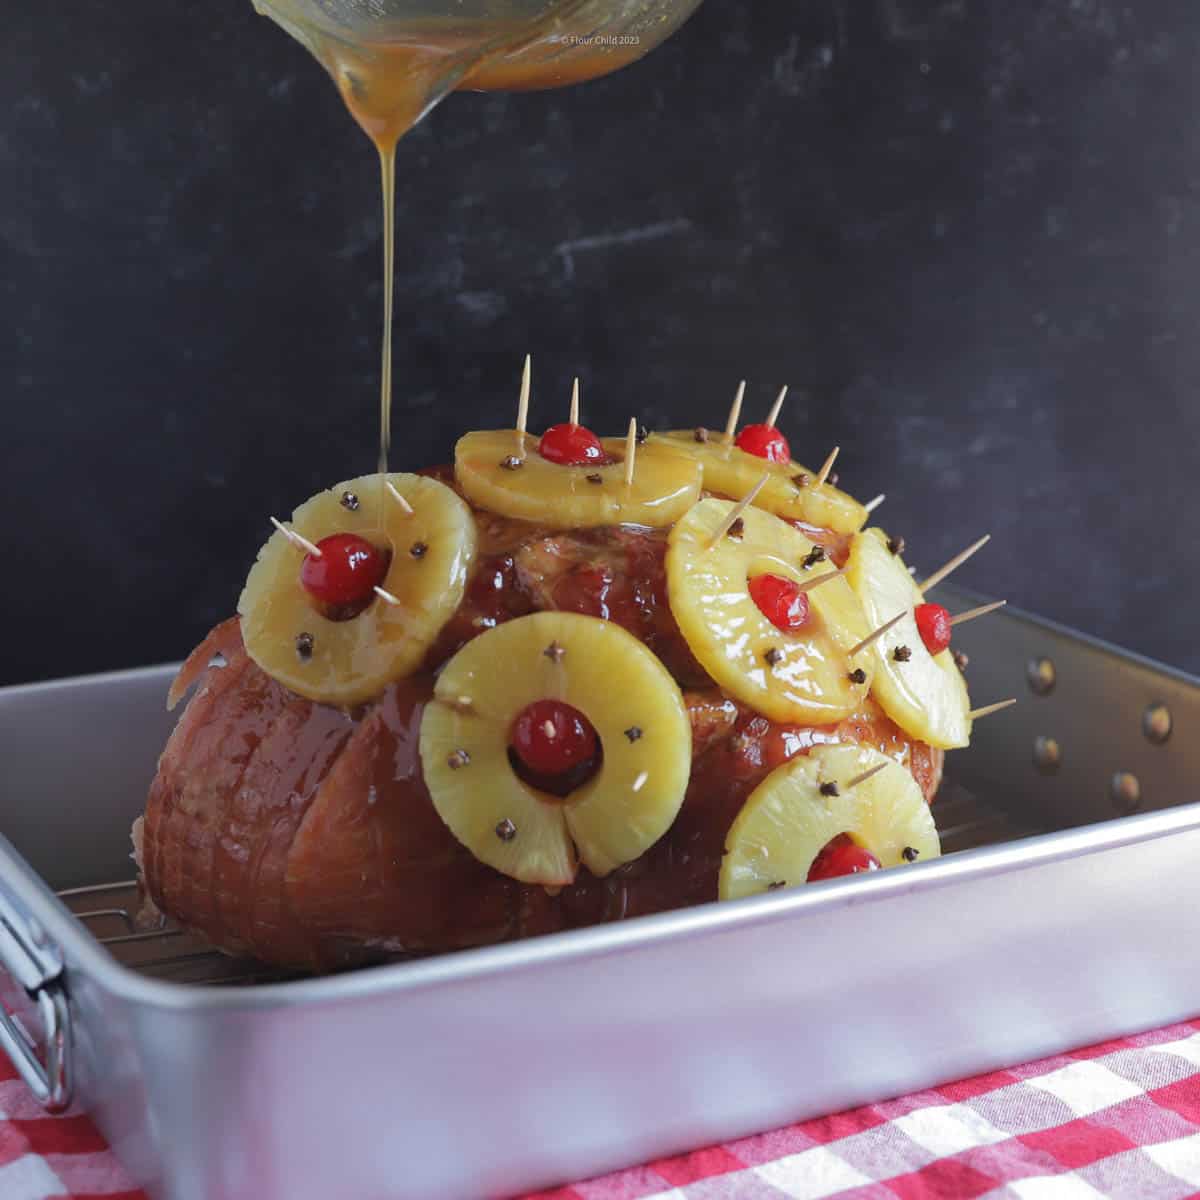 A spiral sliced ham with pineapple and cherries affixed with toothpick, sitting in a large silver roasting pan.